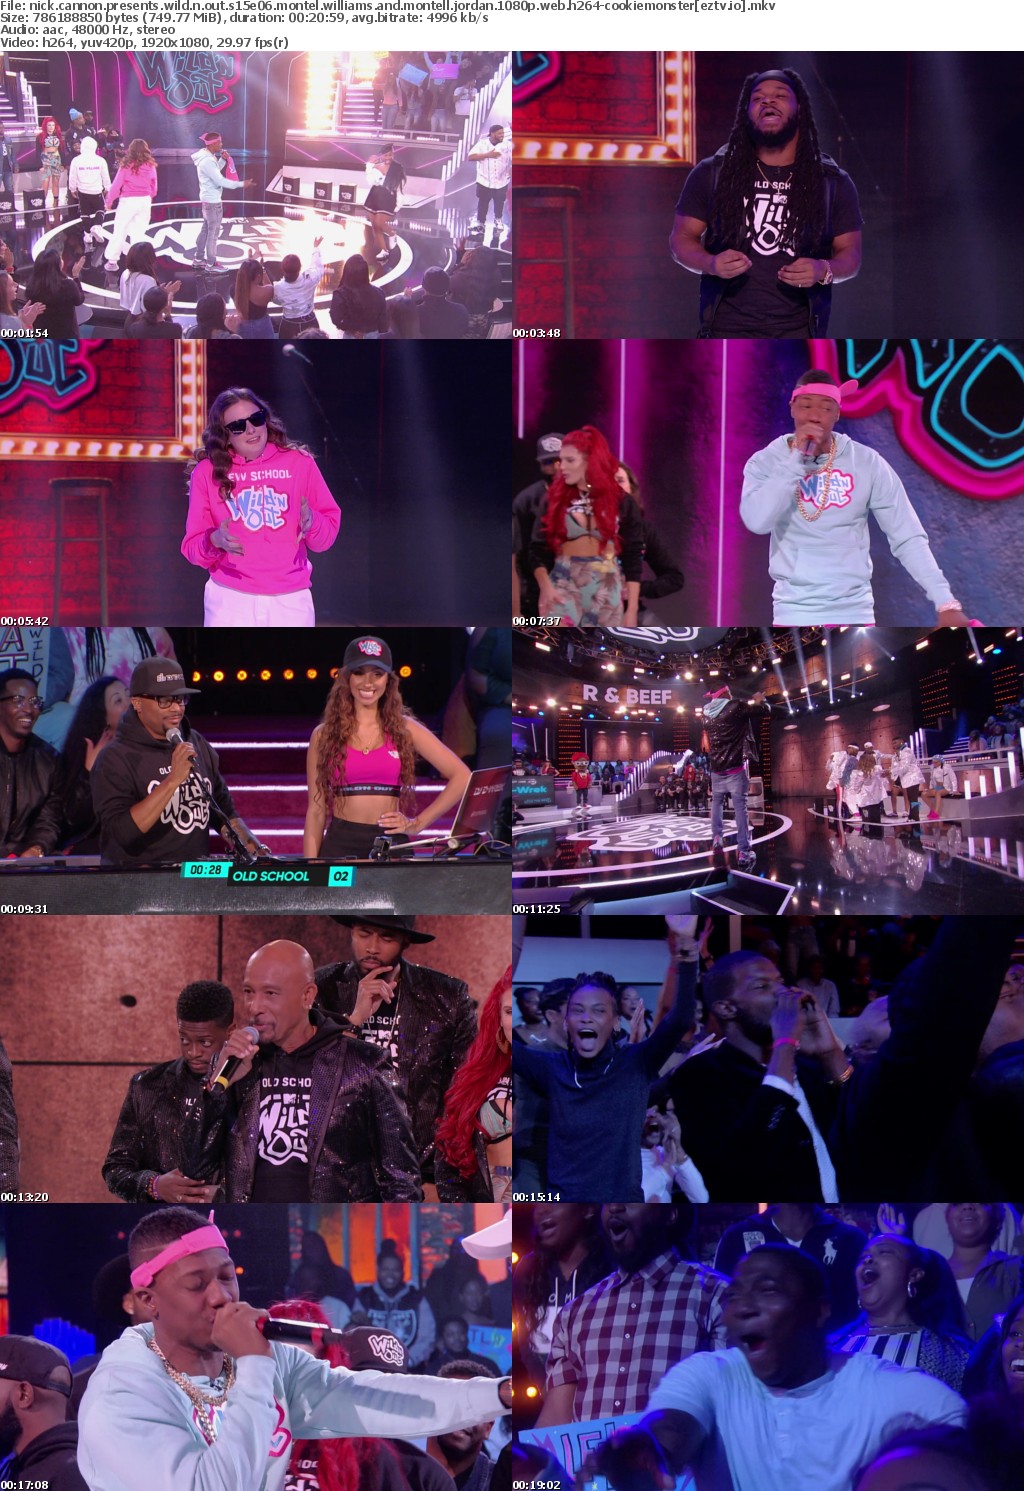 Nick Cannon Presents Wild n Out S15E06 Montel Williams and Montell Jordan 1080p WEB h264-CookieMonster